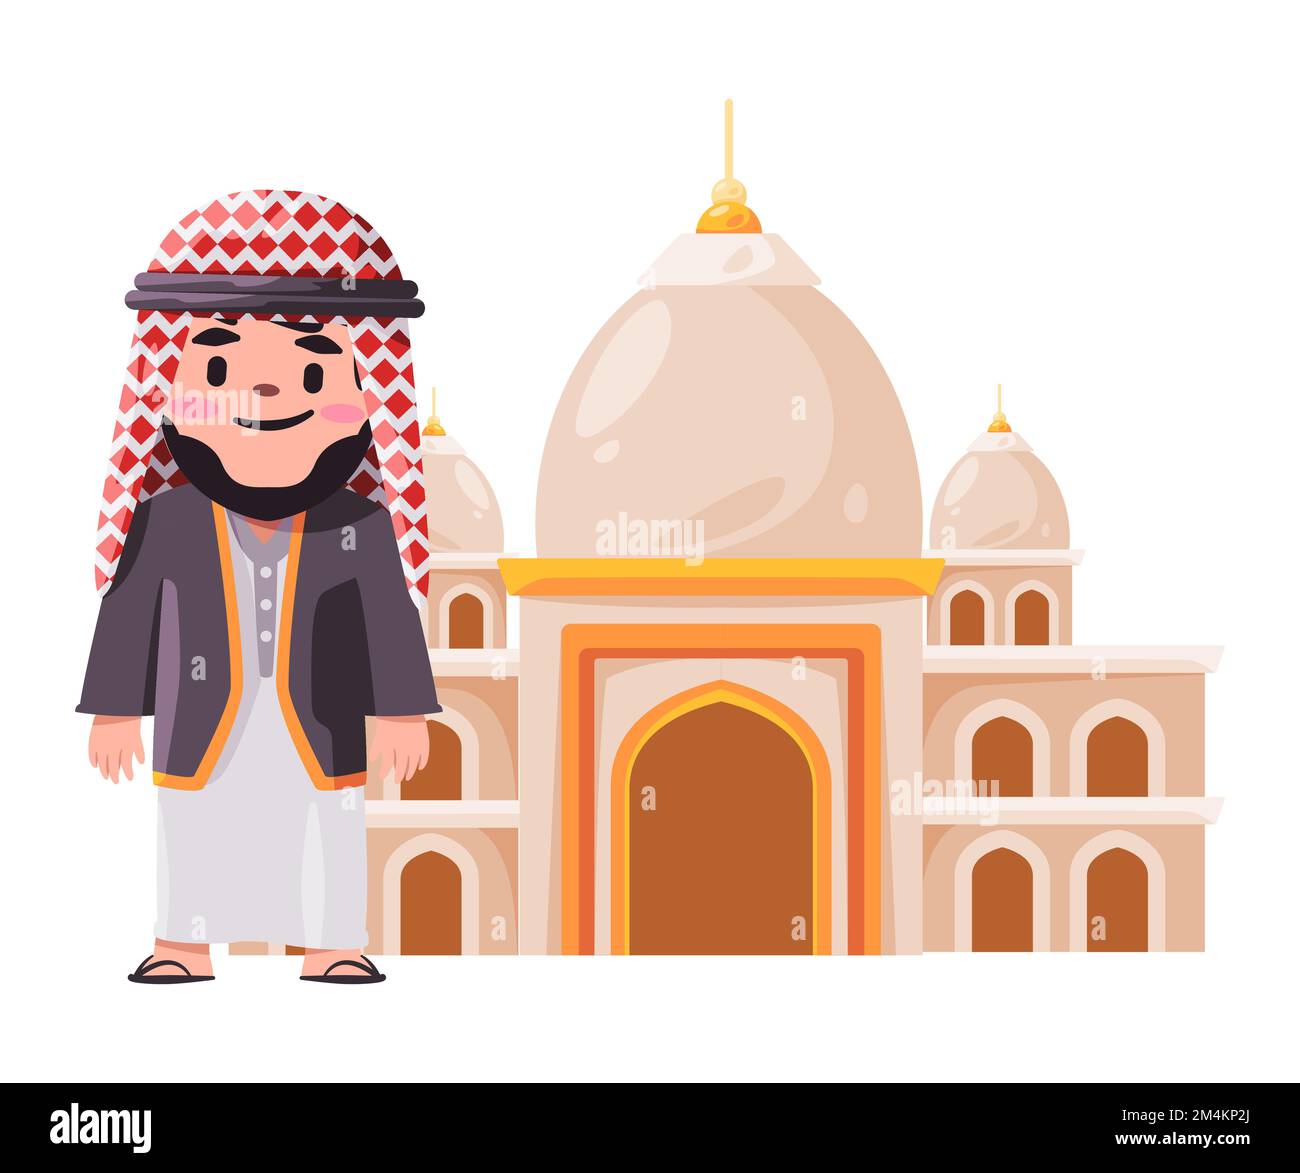 Arab Islam people wearing head cover kaffiyeh pose standing in front of mosque building drawing illustration Stock Vector